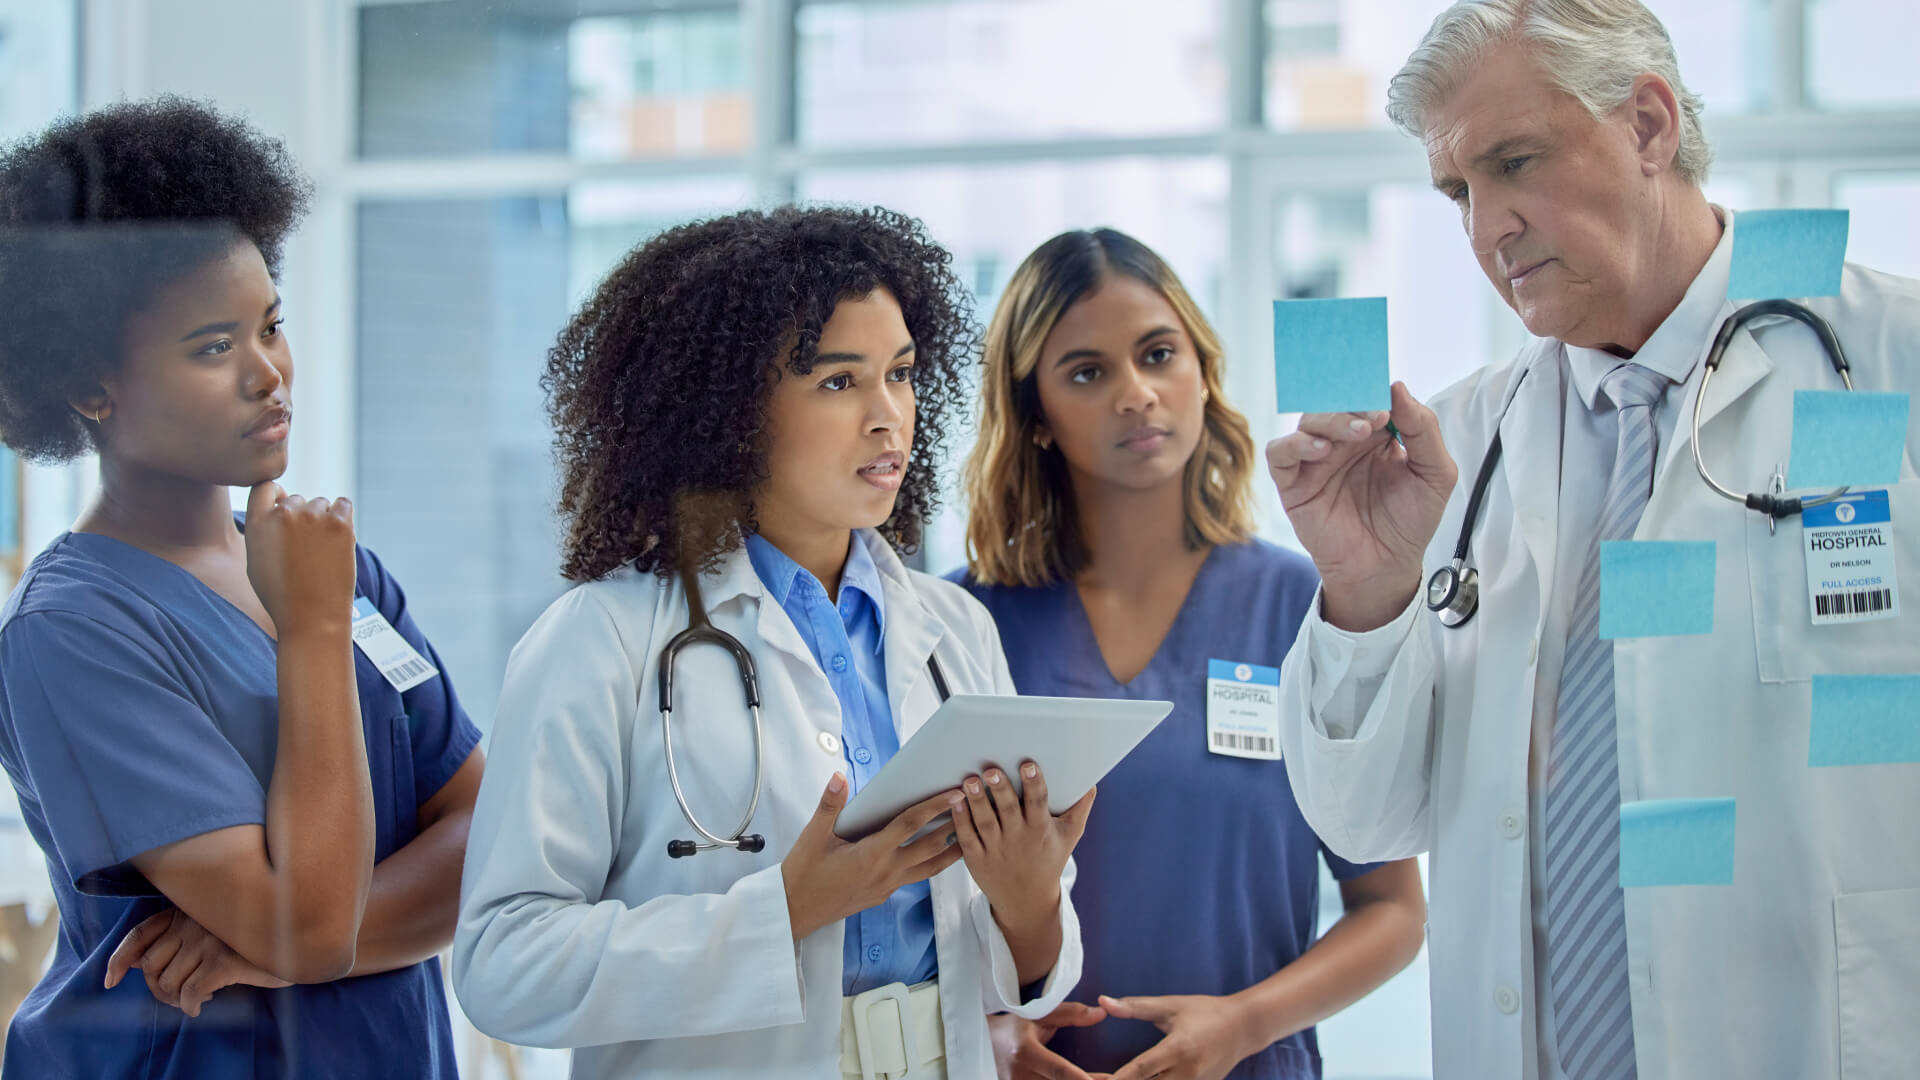 A diverse team of healthcare professionals in a clinical setting, with a senior doctor holding up sticky notes during a collaborative discussion, while a female doctor with a tablet listens intently, illustrating teamwork and communication in patient care coordination.